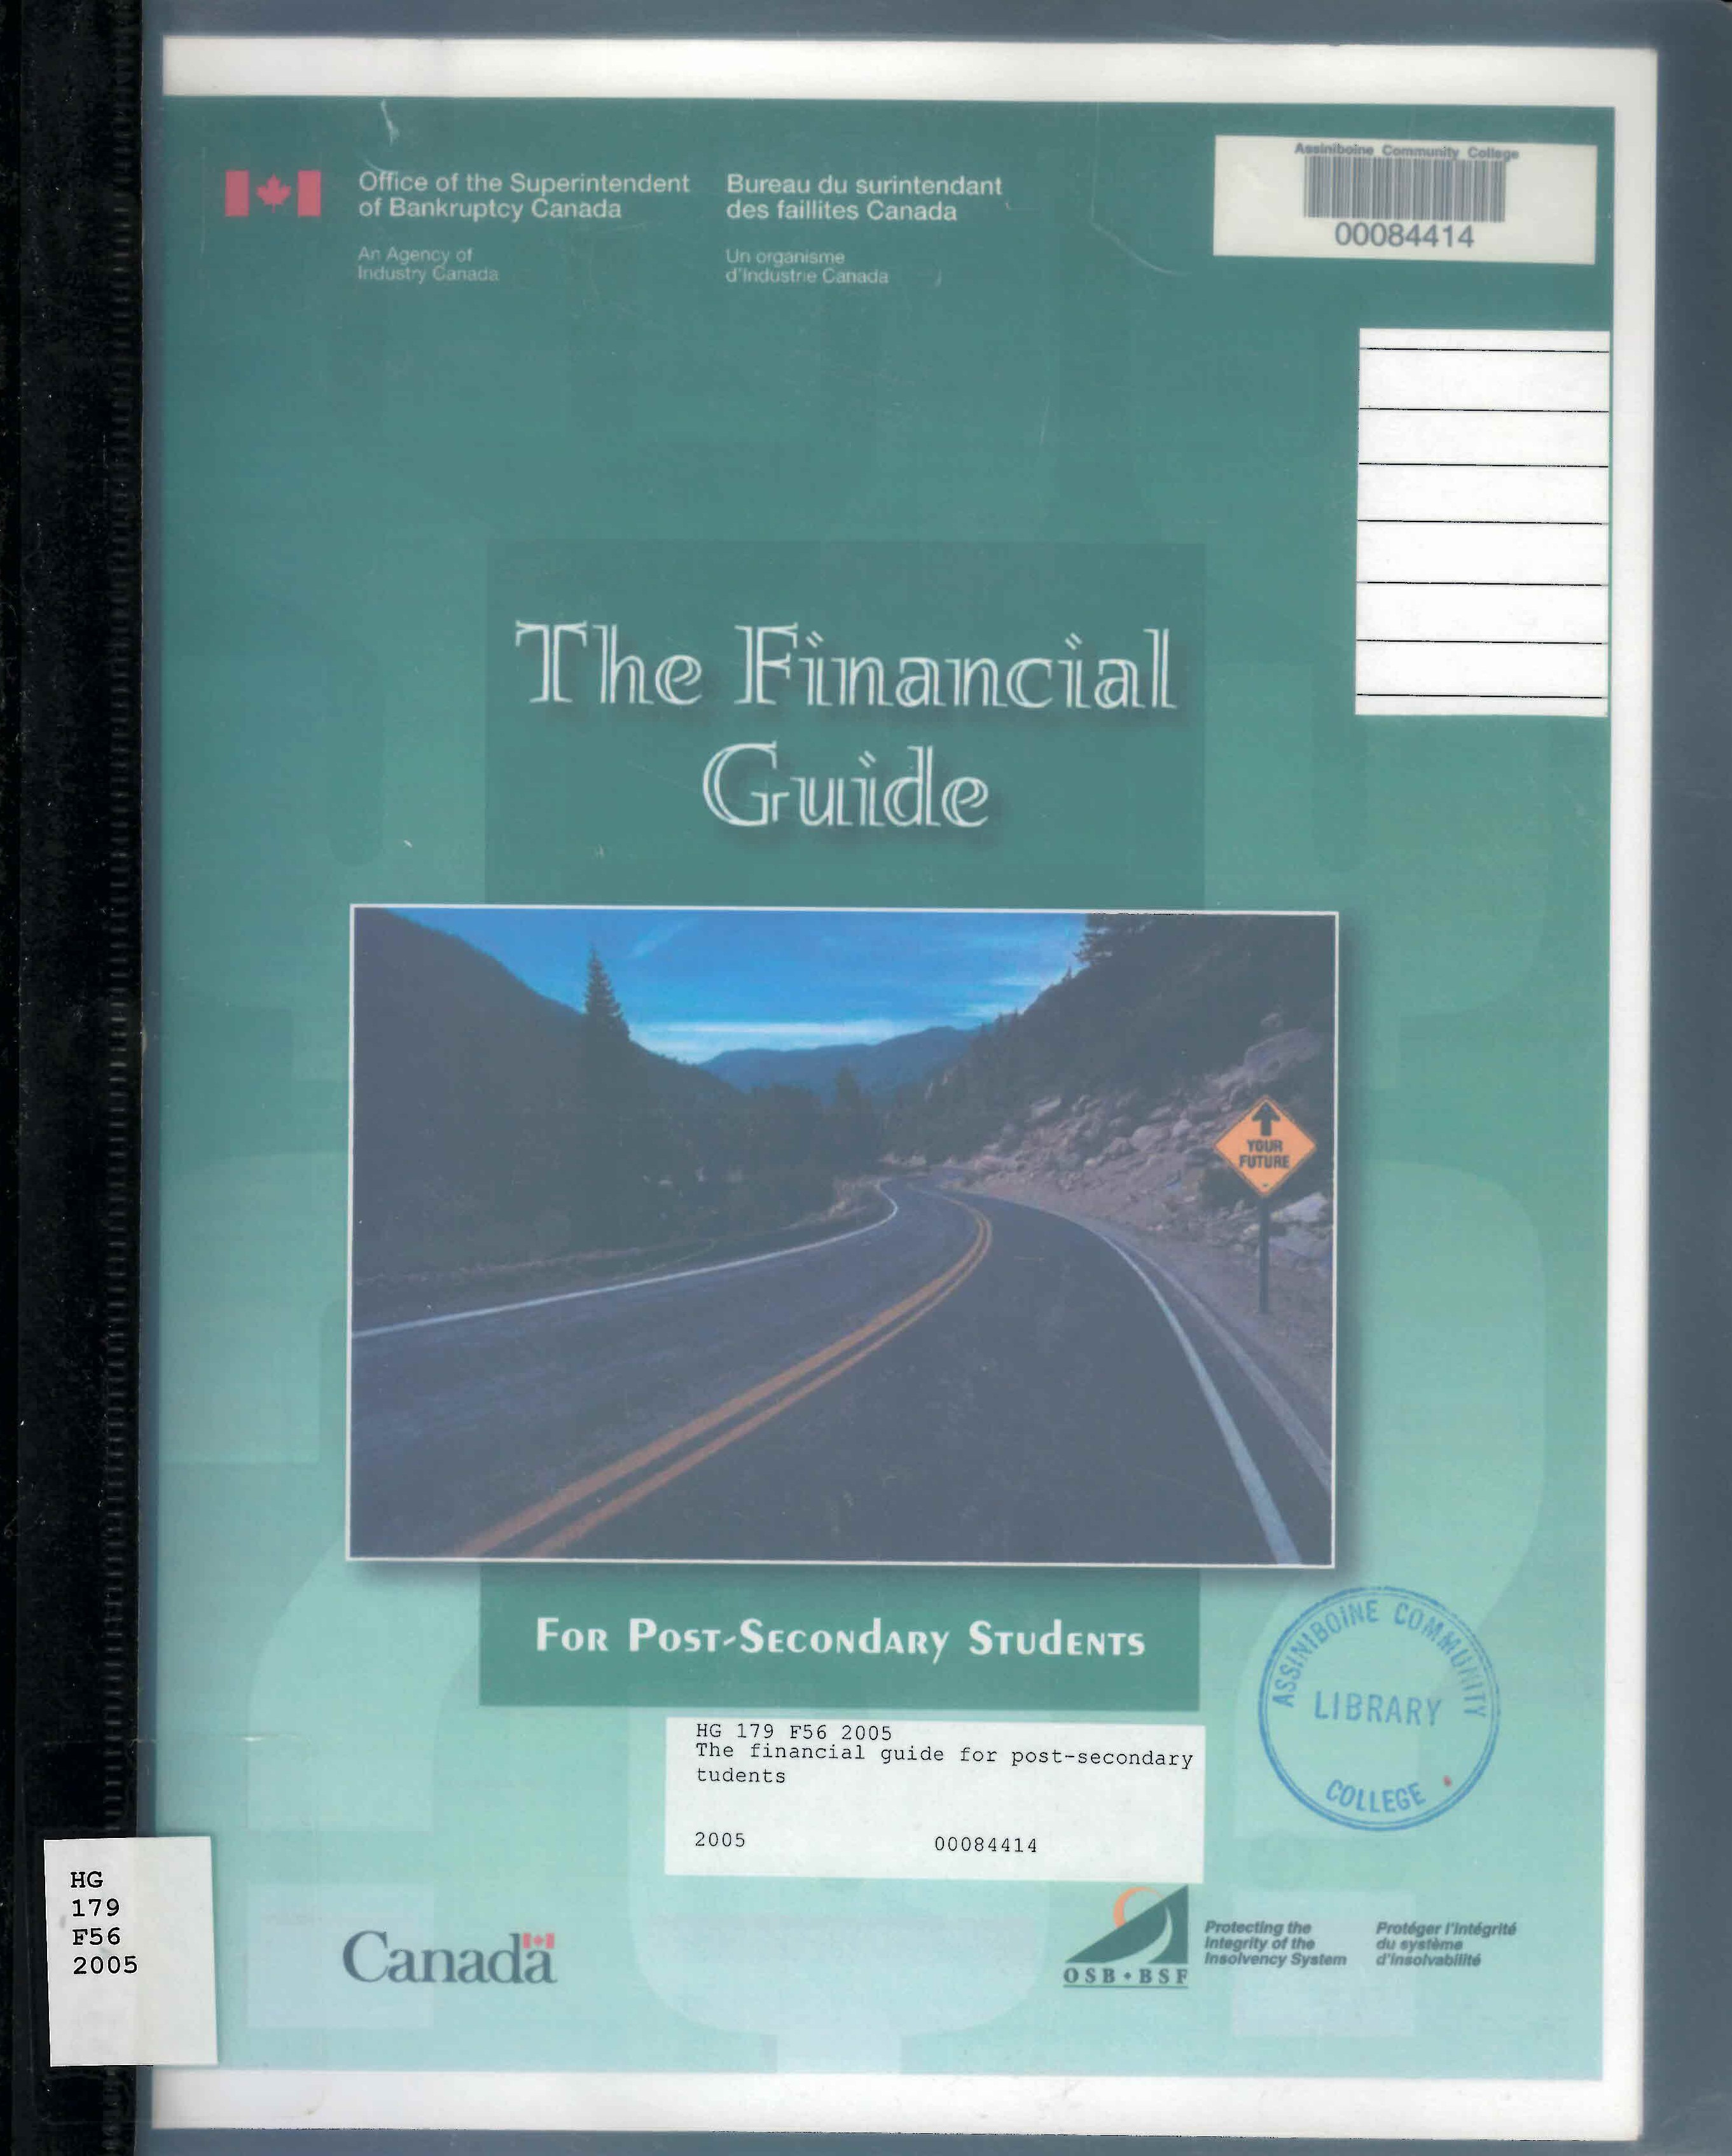 The financial guide for post-secondary students